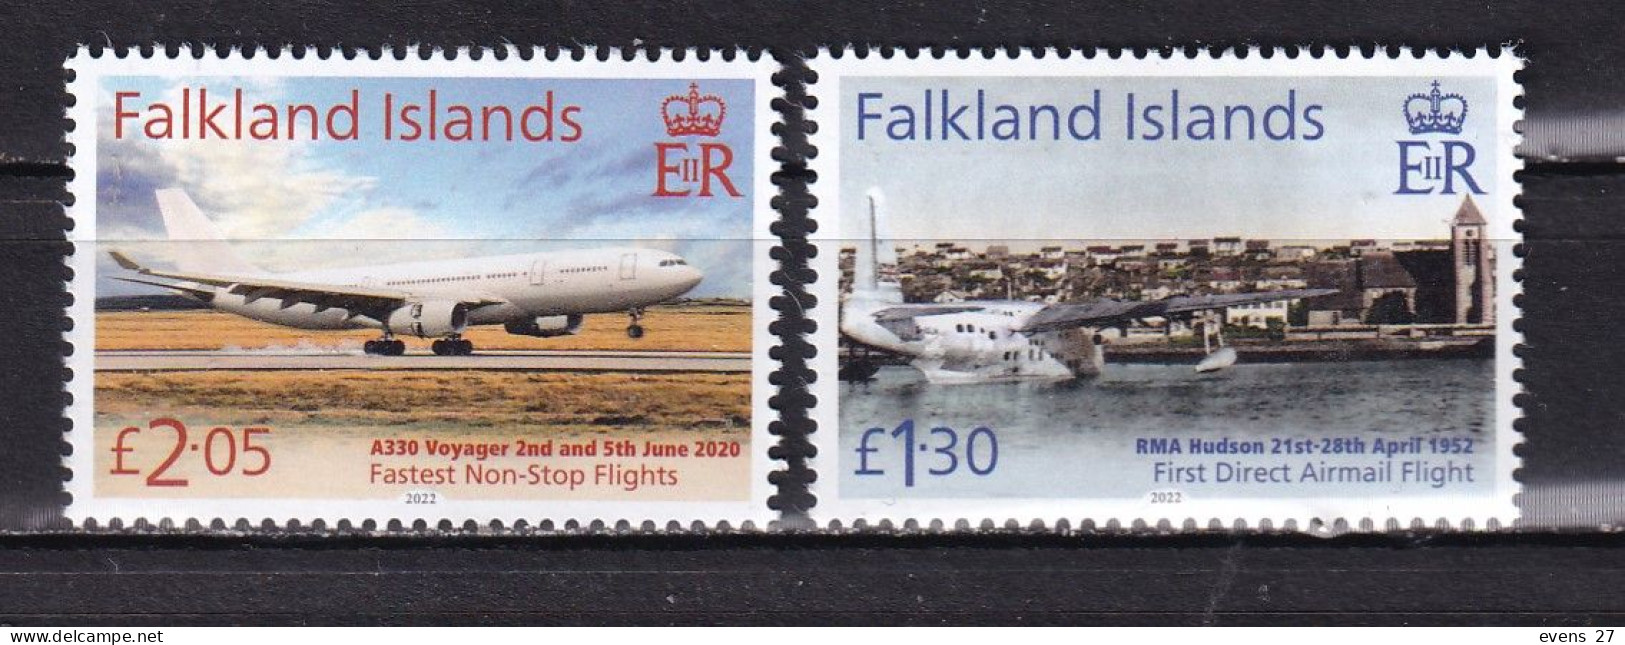 FALKLAND ISLANDS-2022-FASTEST NON STOP FLIGHT-FIRST AIRMAIL DIRECT FLIGHT- --MNH. - Airplanes